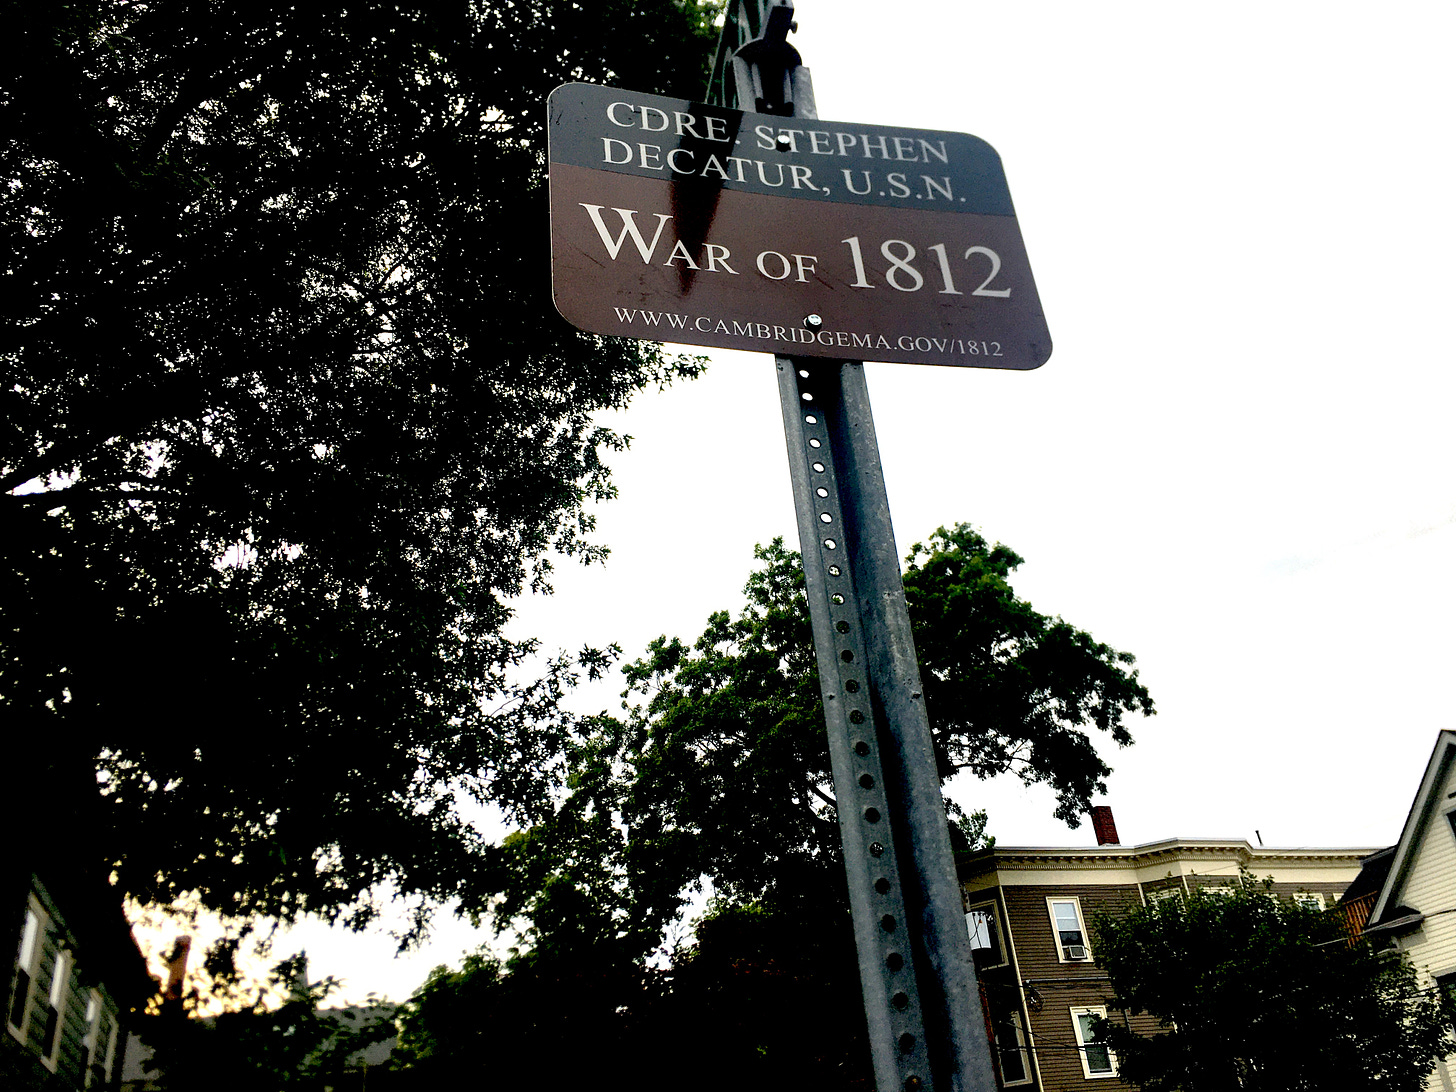 A small black and brown street sign on a corner in Cambridge reads in memoriam of a soldier, Stephen Decatur, who died in the War of 1812.